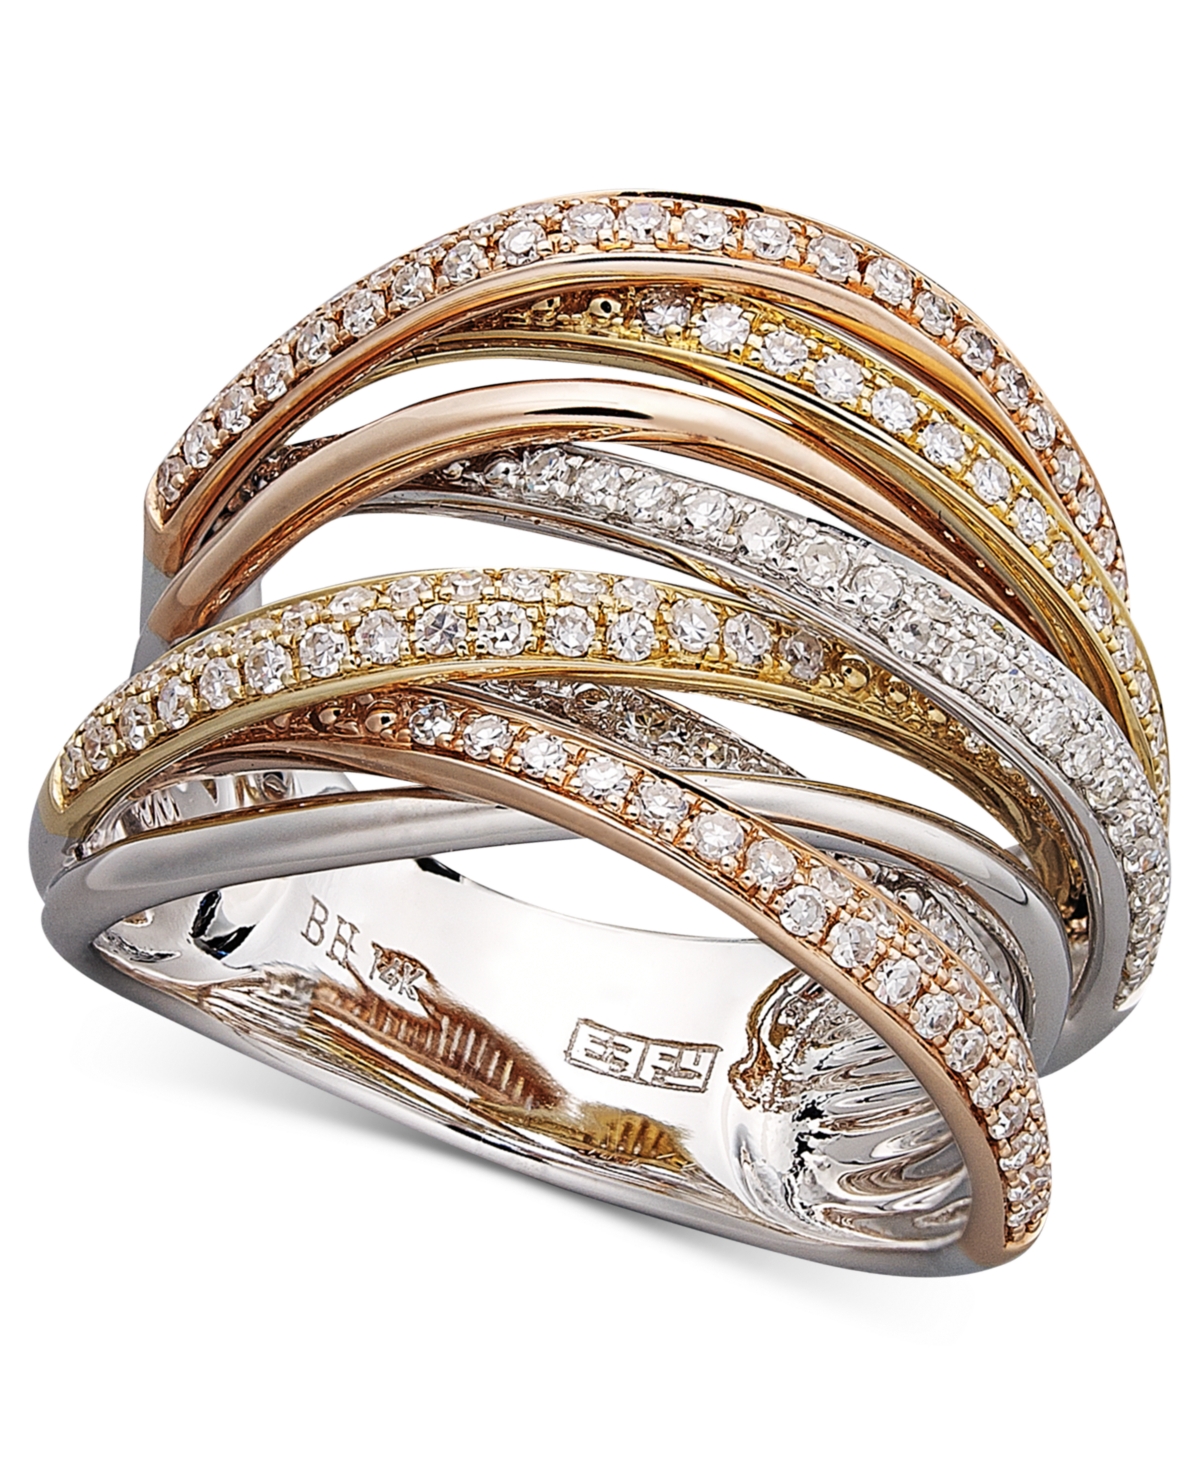 Effy Collection Effy Diamond Overlap Ring (3/4 ct. t.w.) in Tri Color Gold